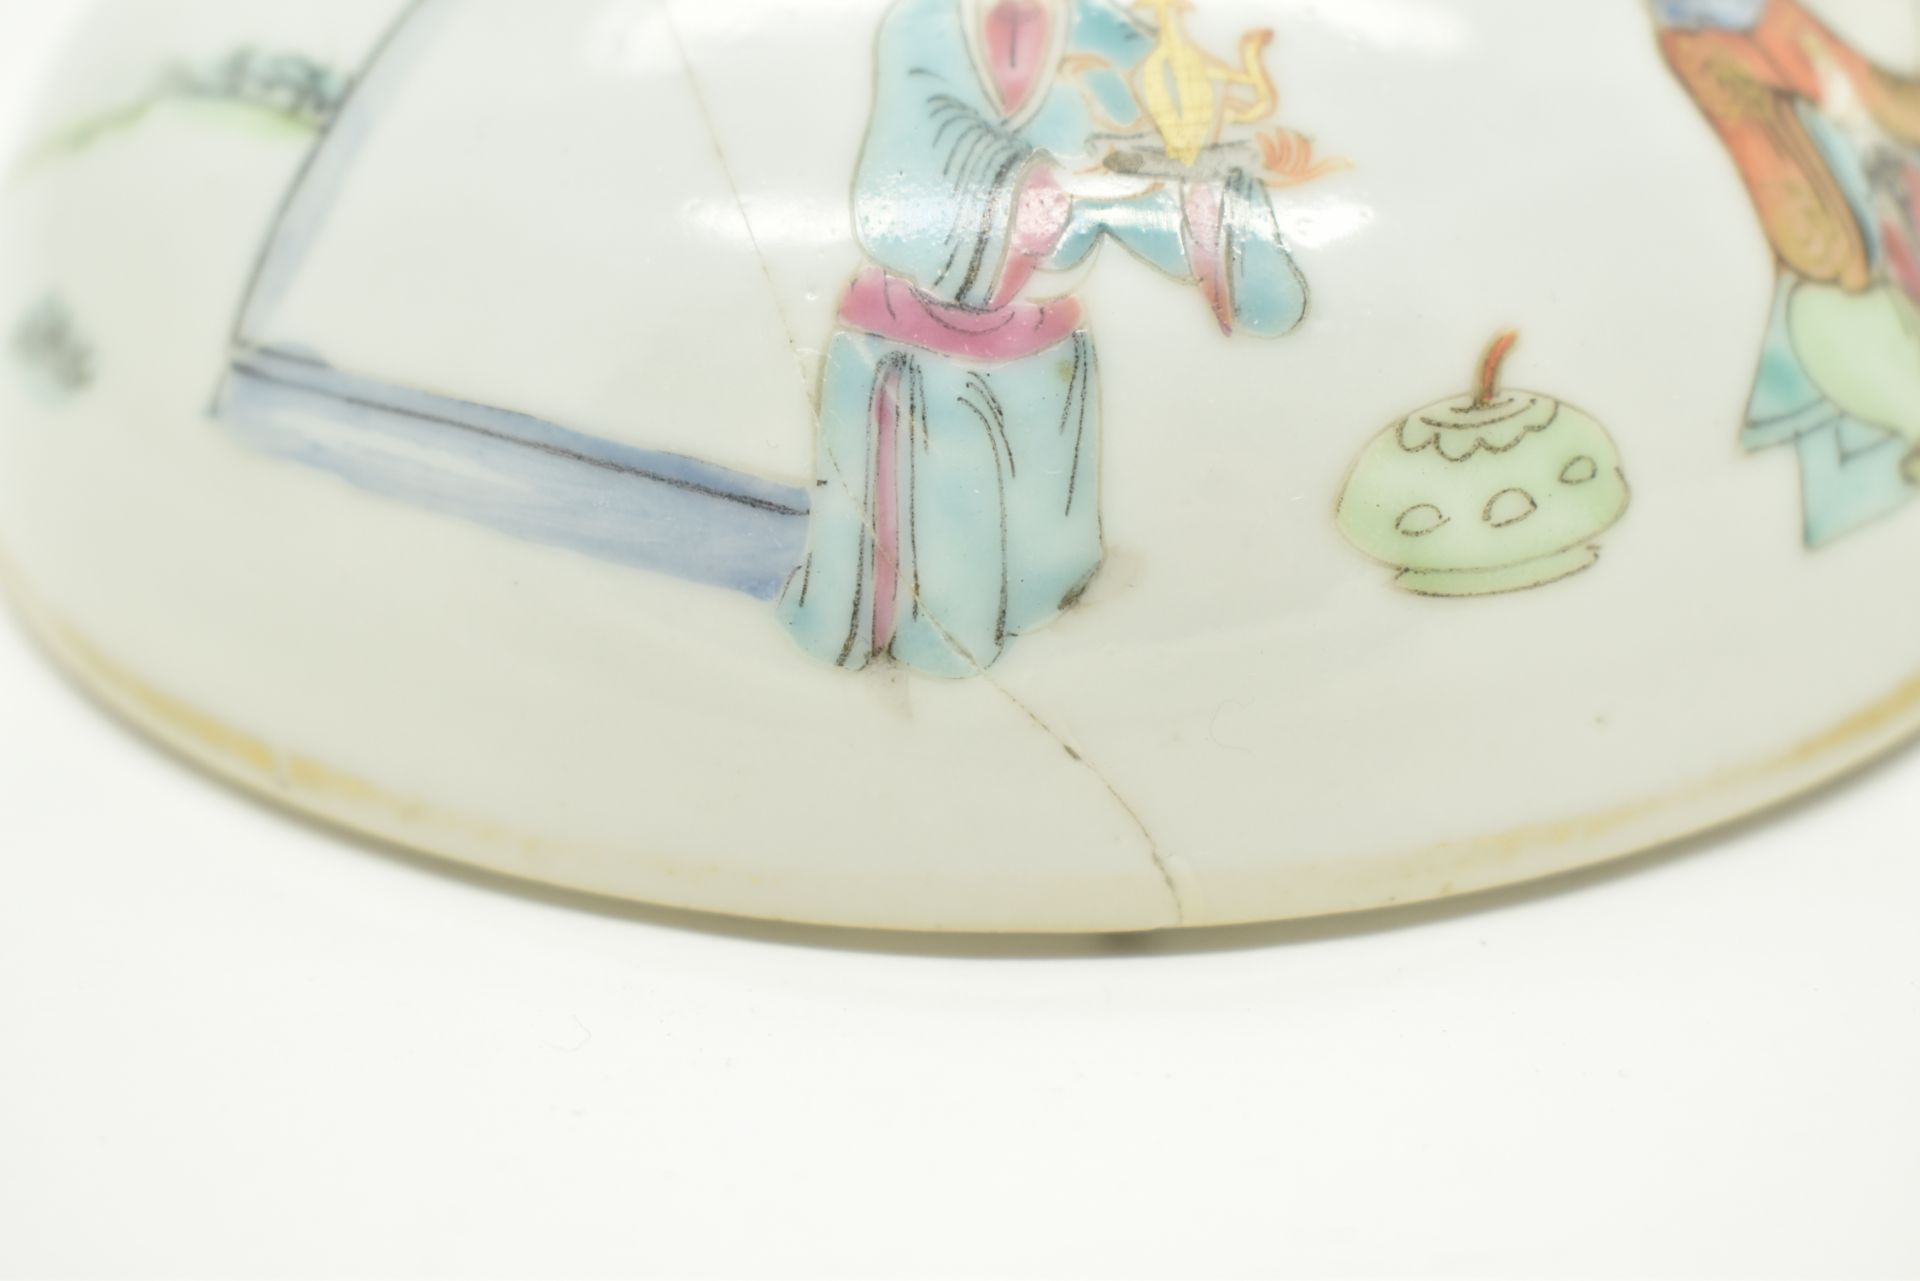 QING TONGZHI FAMILLE ROSE JAR WITH LID 清 同治粉彩盖罐 - Image 10 of 10